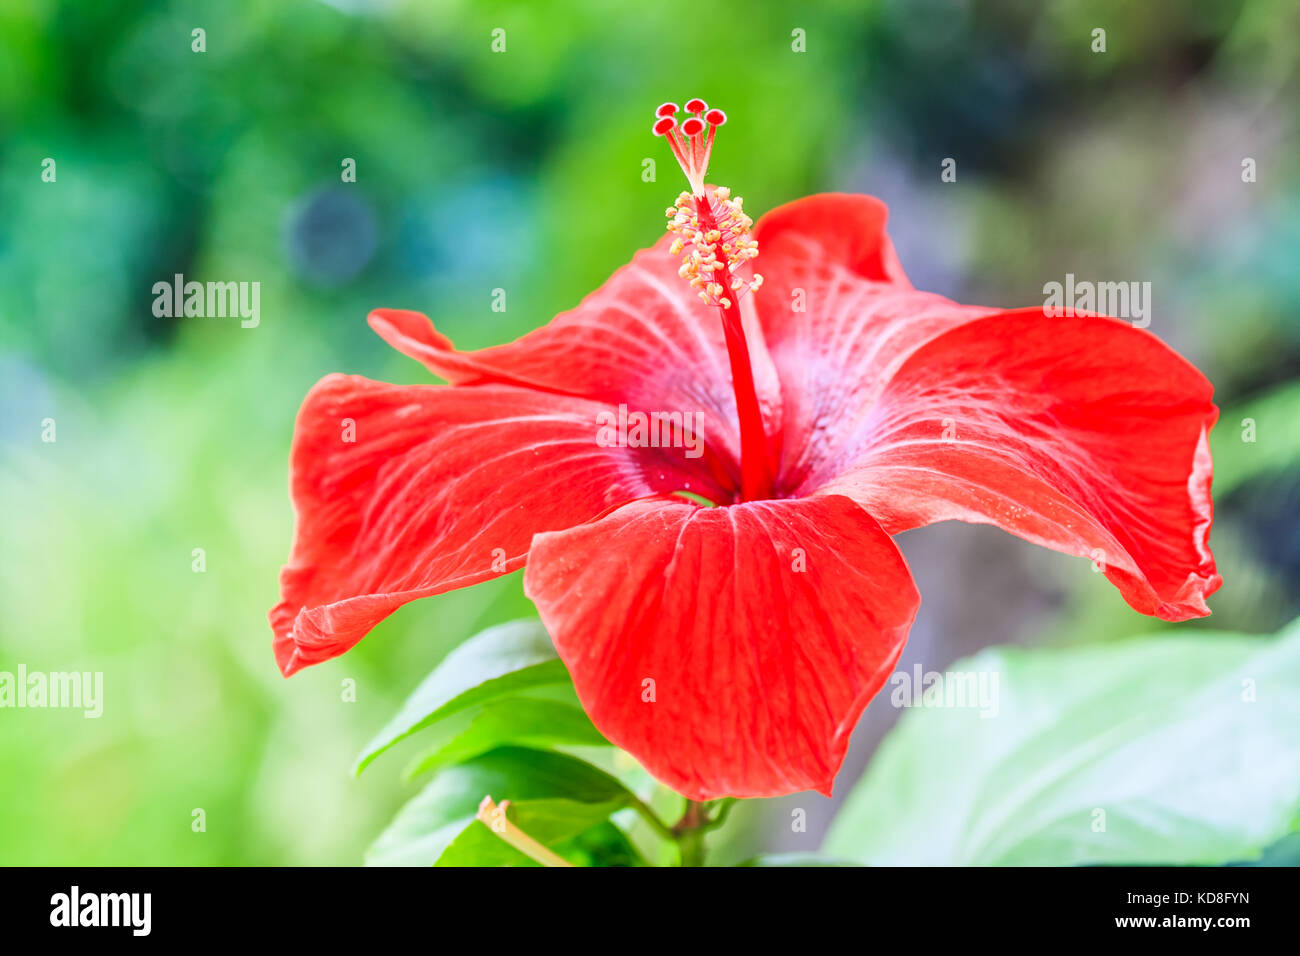 The brilliant red flower of an hibiscus glowing in the sun. Stock Photo